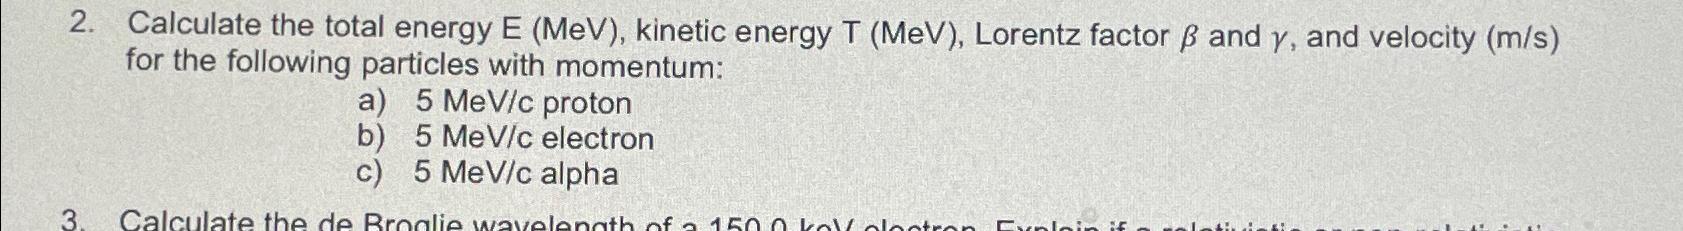 2. Calculate the total energy E (MeV), kinetic energy T (MeV), Lorentz factor & and y, and velocity (m/s) for